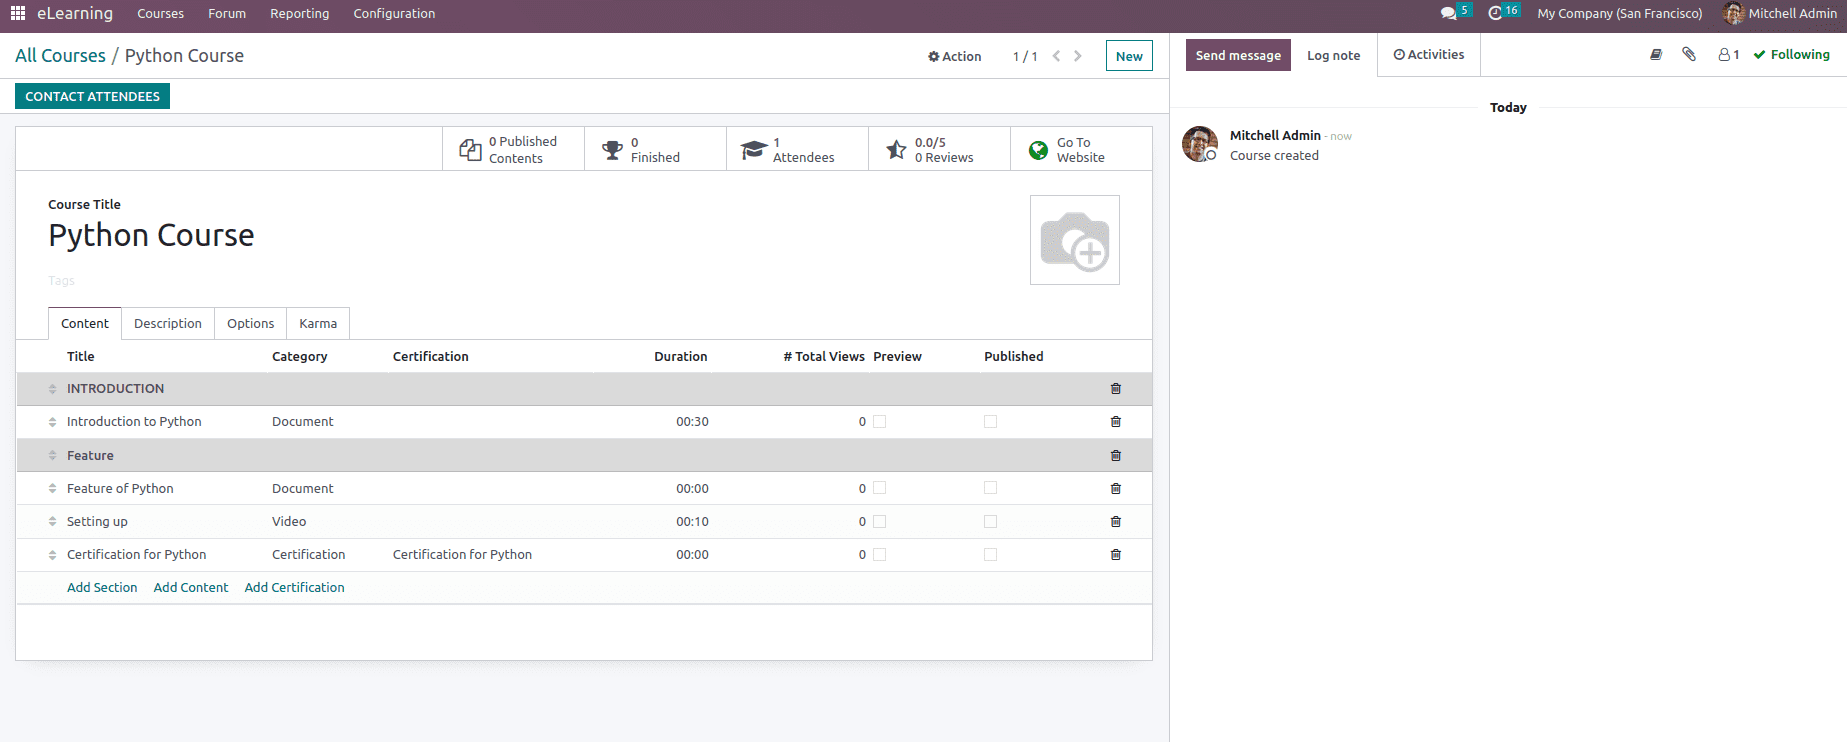 how-to-manage-the-odoo-16-elearning-module-13-cybrosys